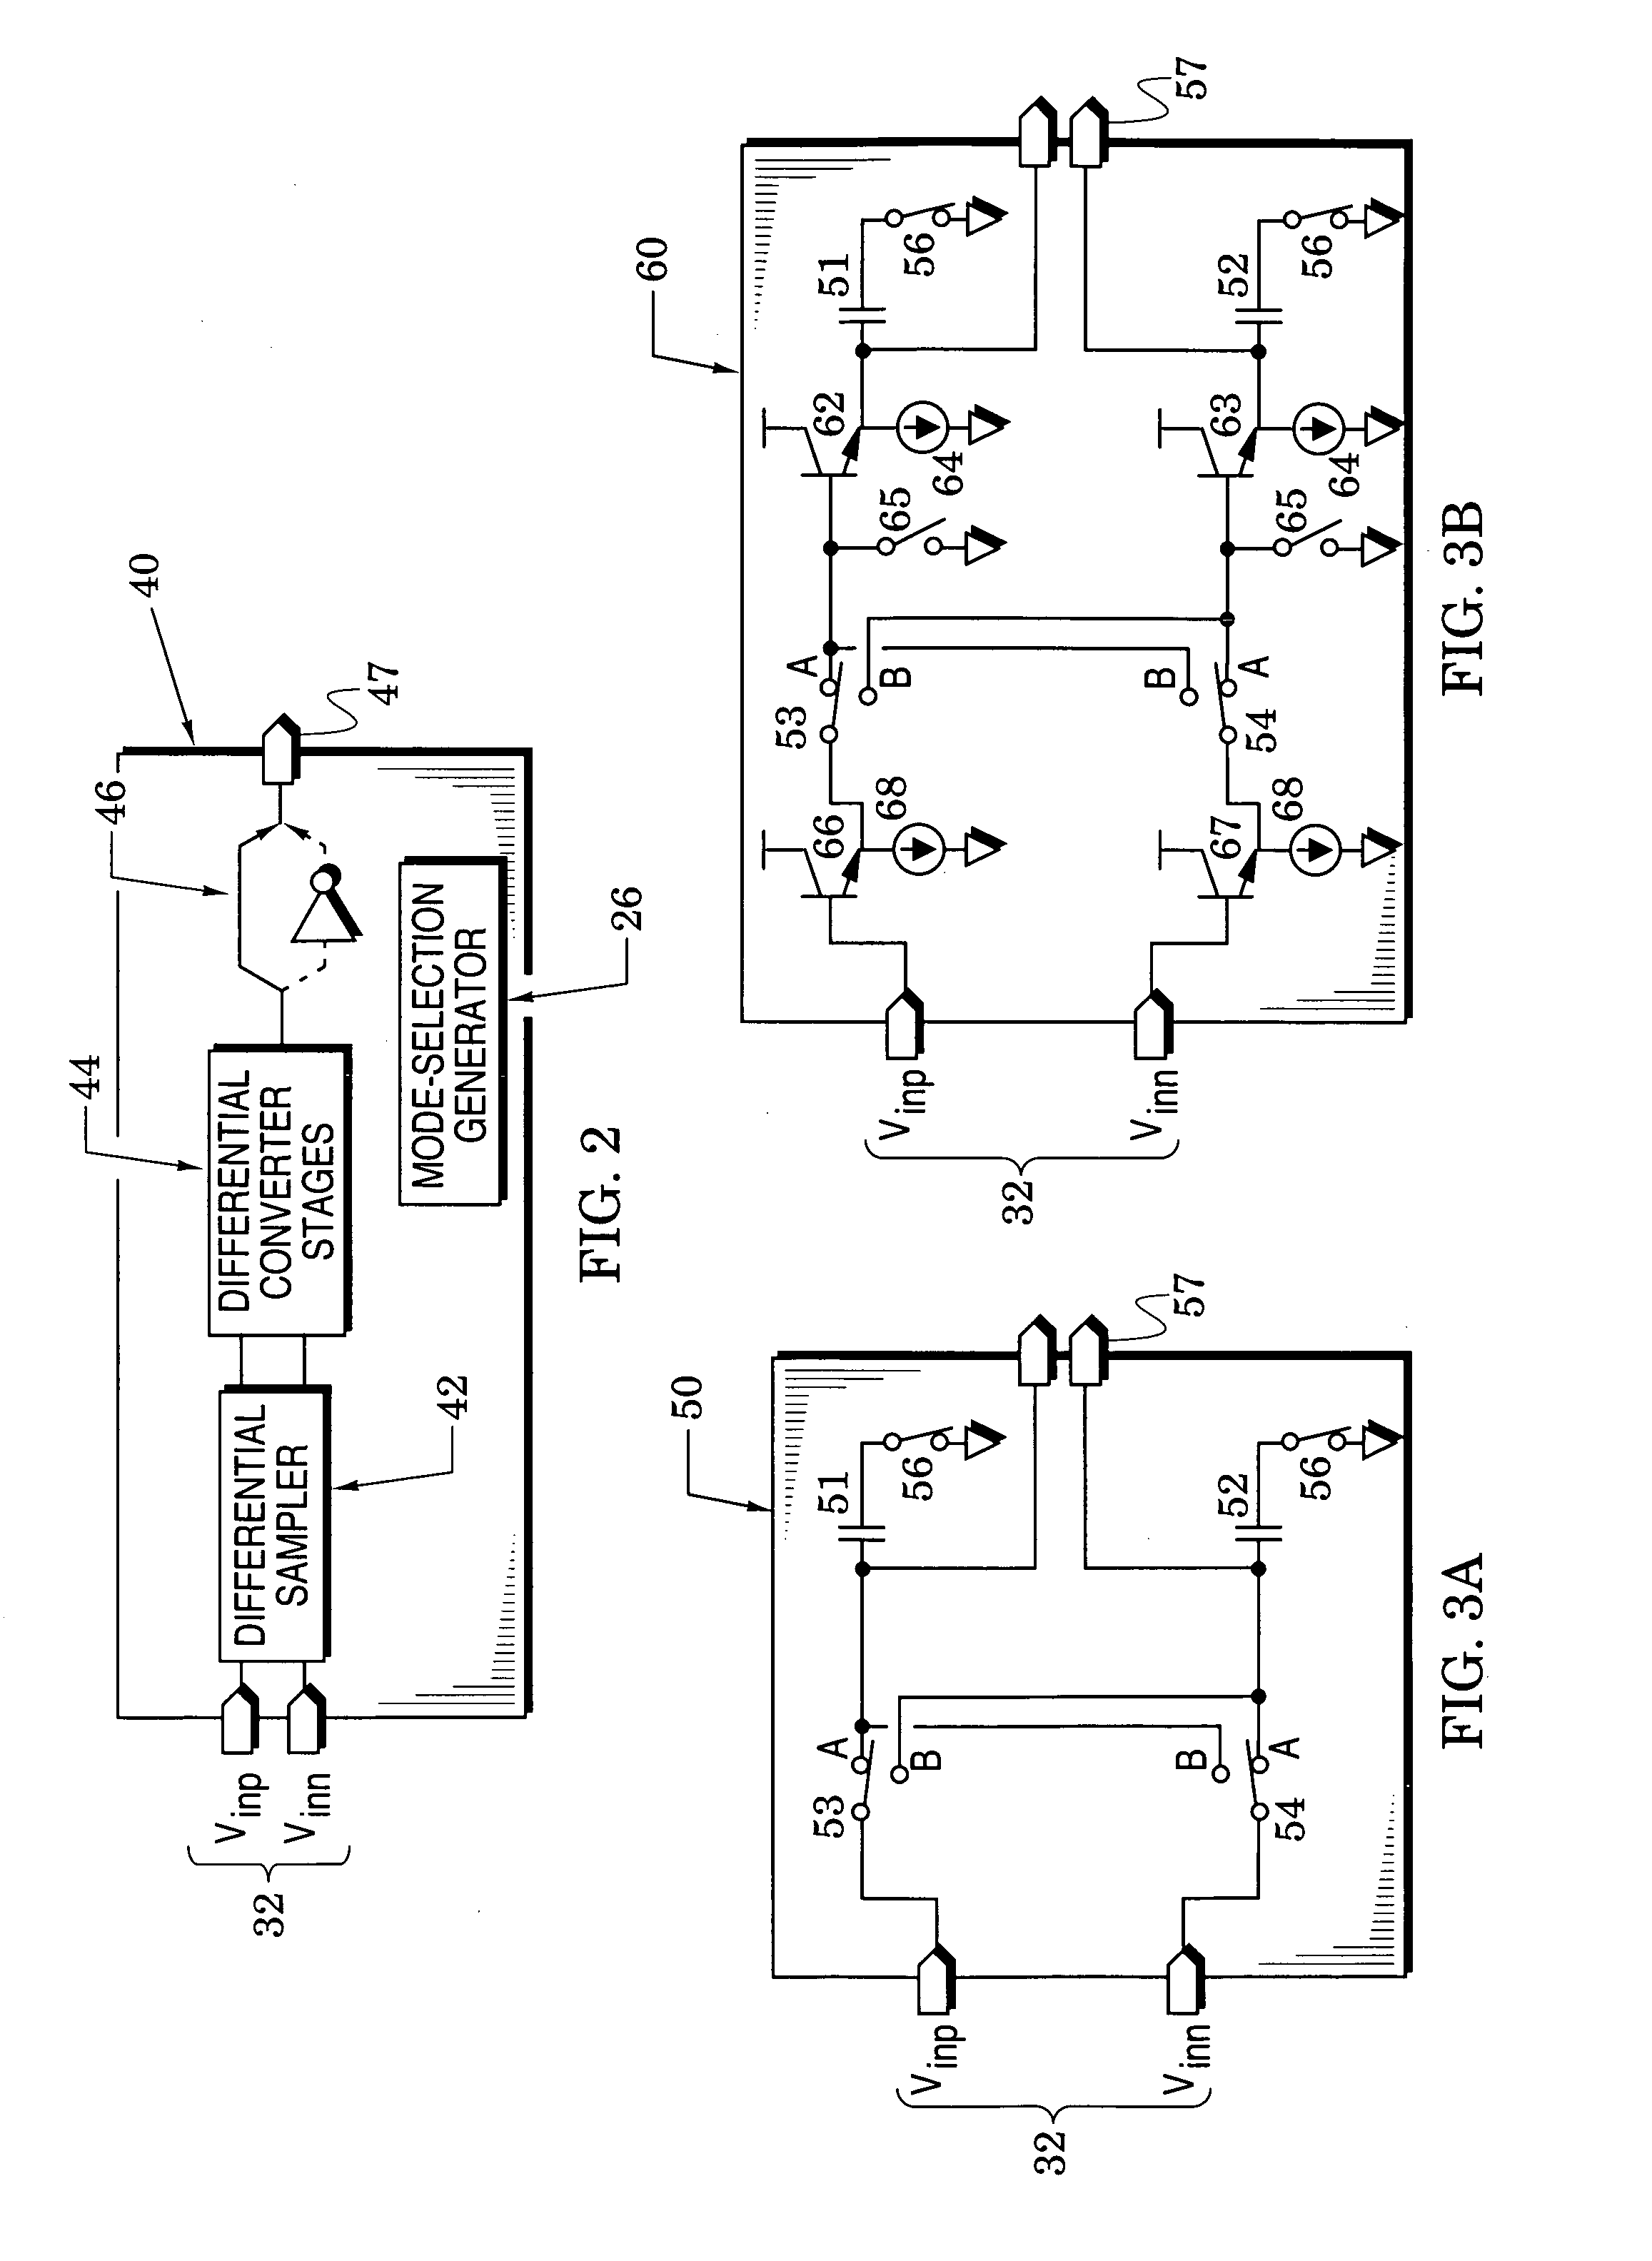 Processing systems and methods that reduce even-order harmonic energy